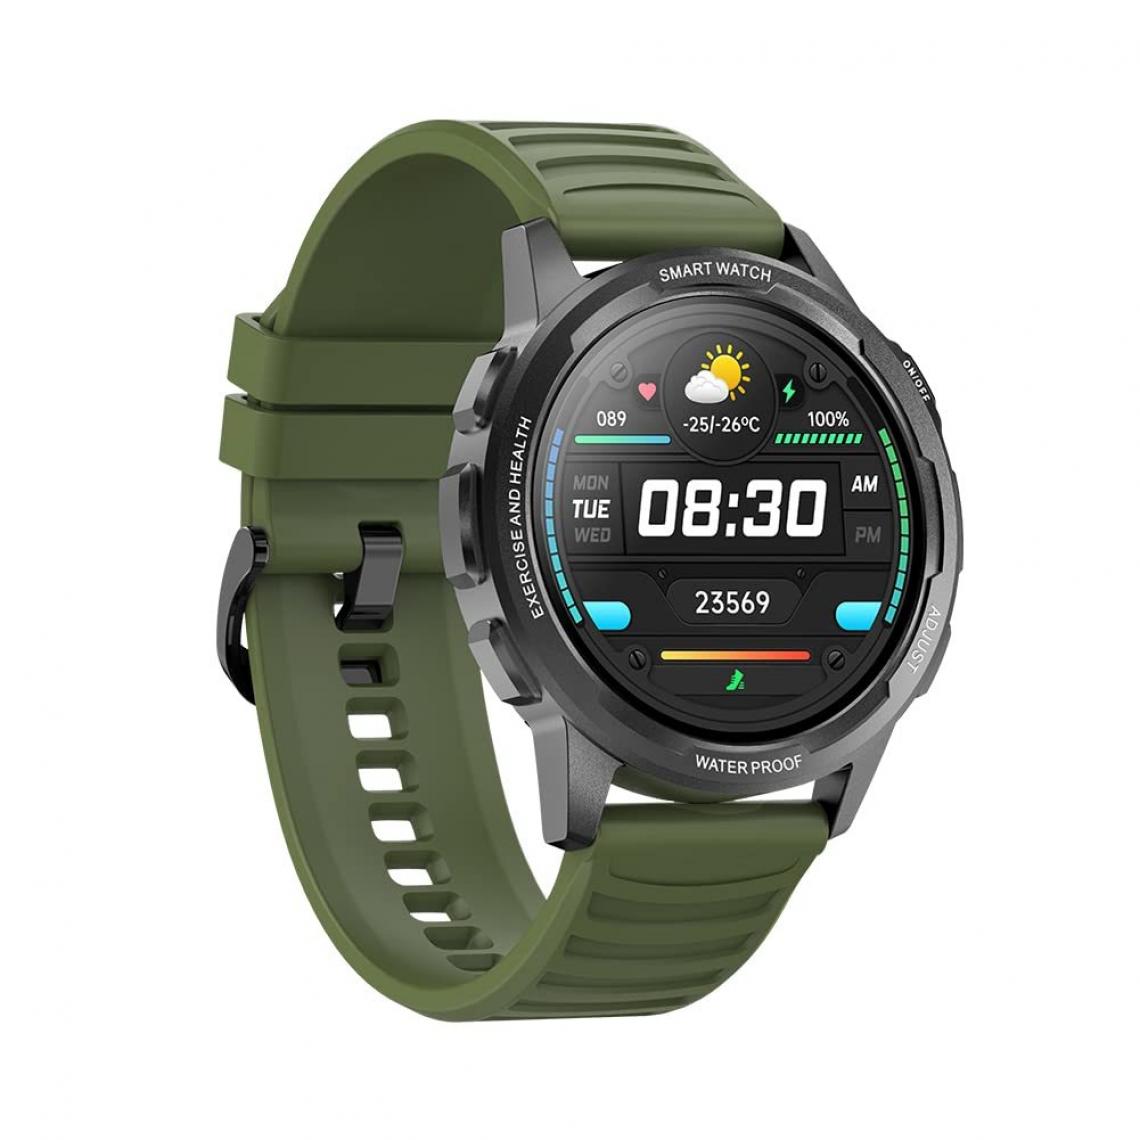 Chronotech Montres - Chronus Screen Touch Bluetooth Smartwatch, Fitness Tracker with 24 Sports Modes, 20 Day Battery Life, with Alarm Clock ect, Blood Oxygen Pressure Heart Rate Monitor, Waterproof, for iPhone Android(Green) - Montre connectée